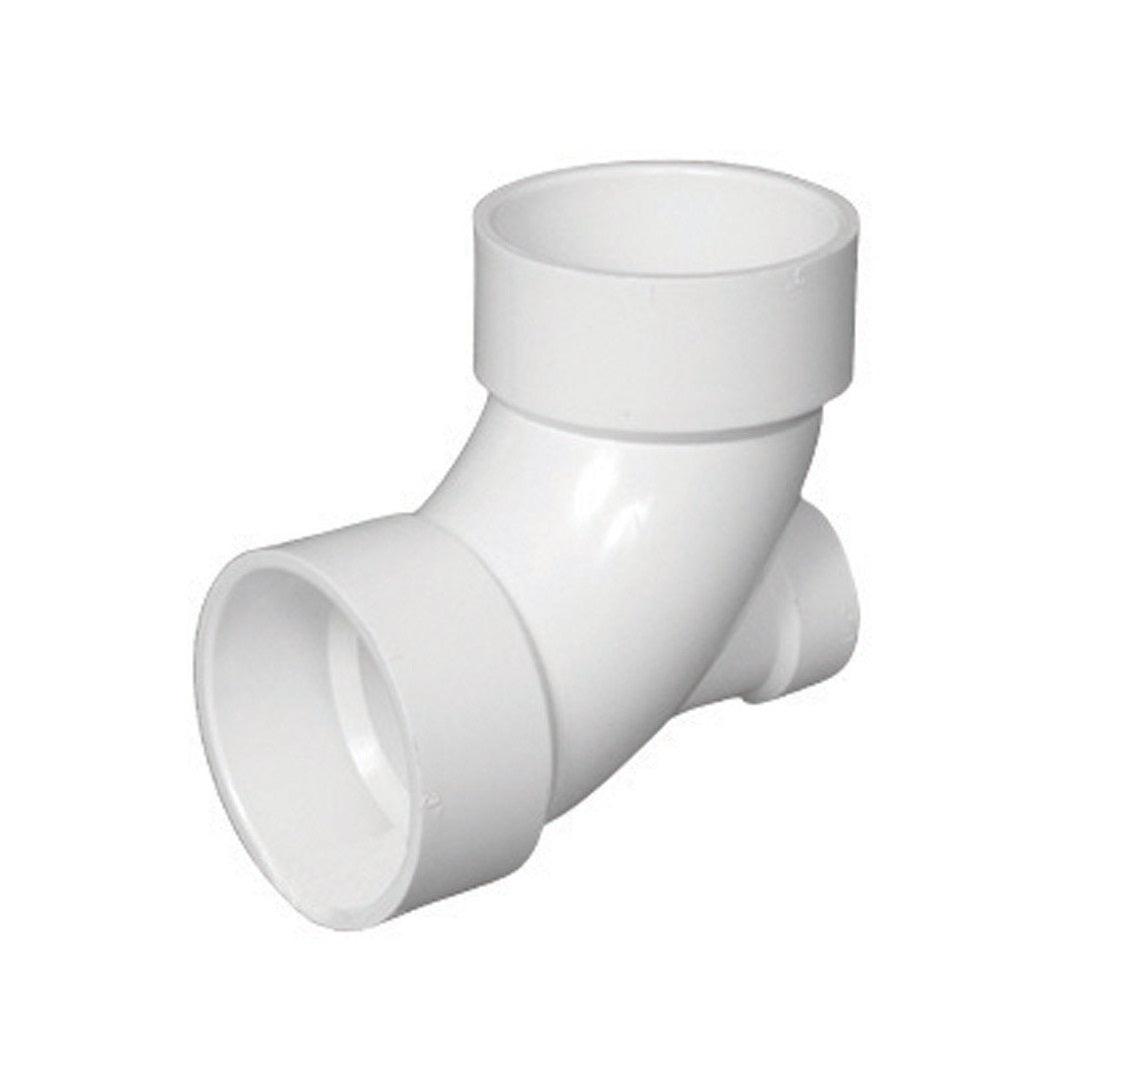 Charlotte Pipe & Found PVC003030600 Schedule 40 Elbow, PVC